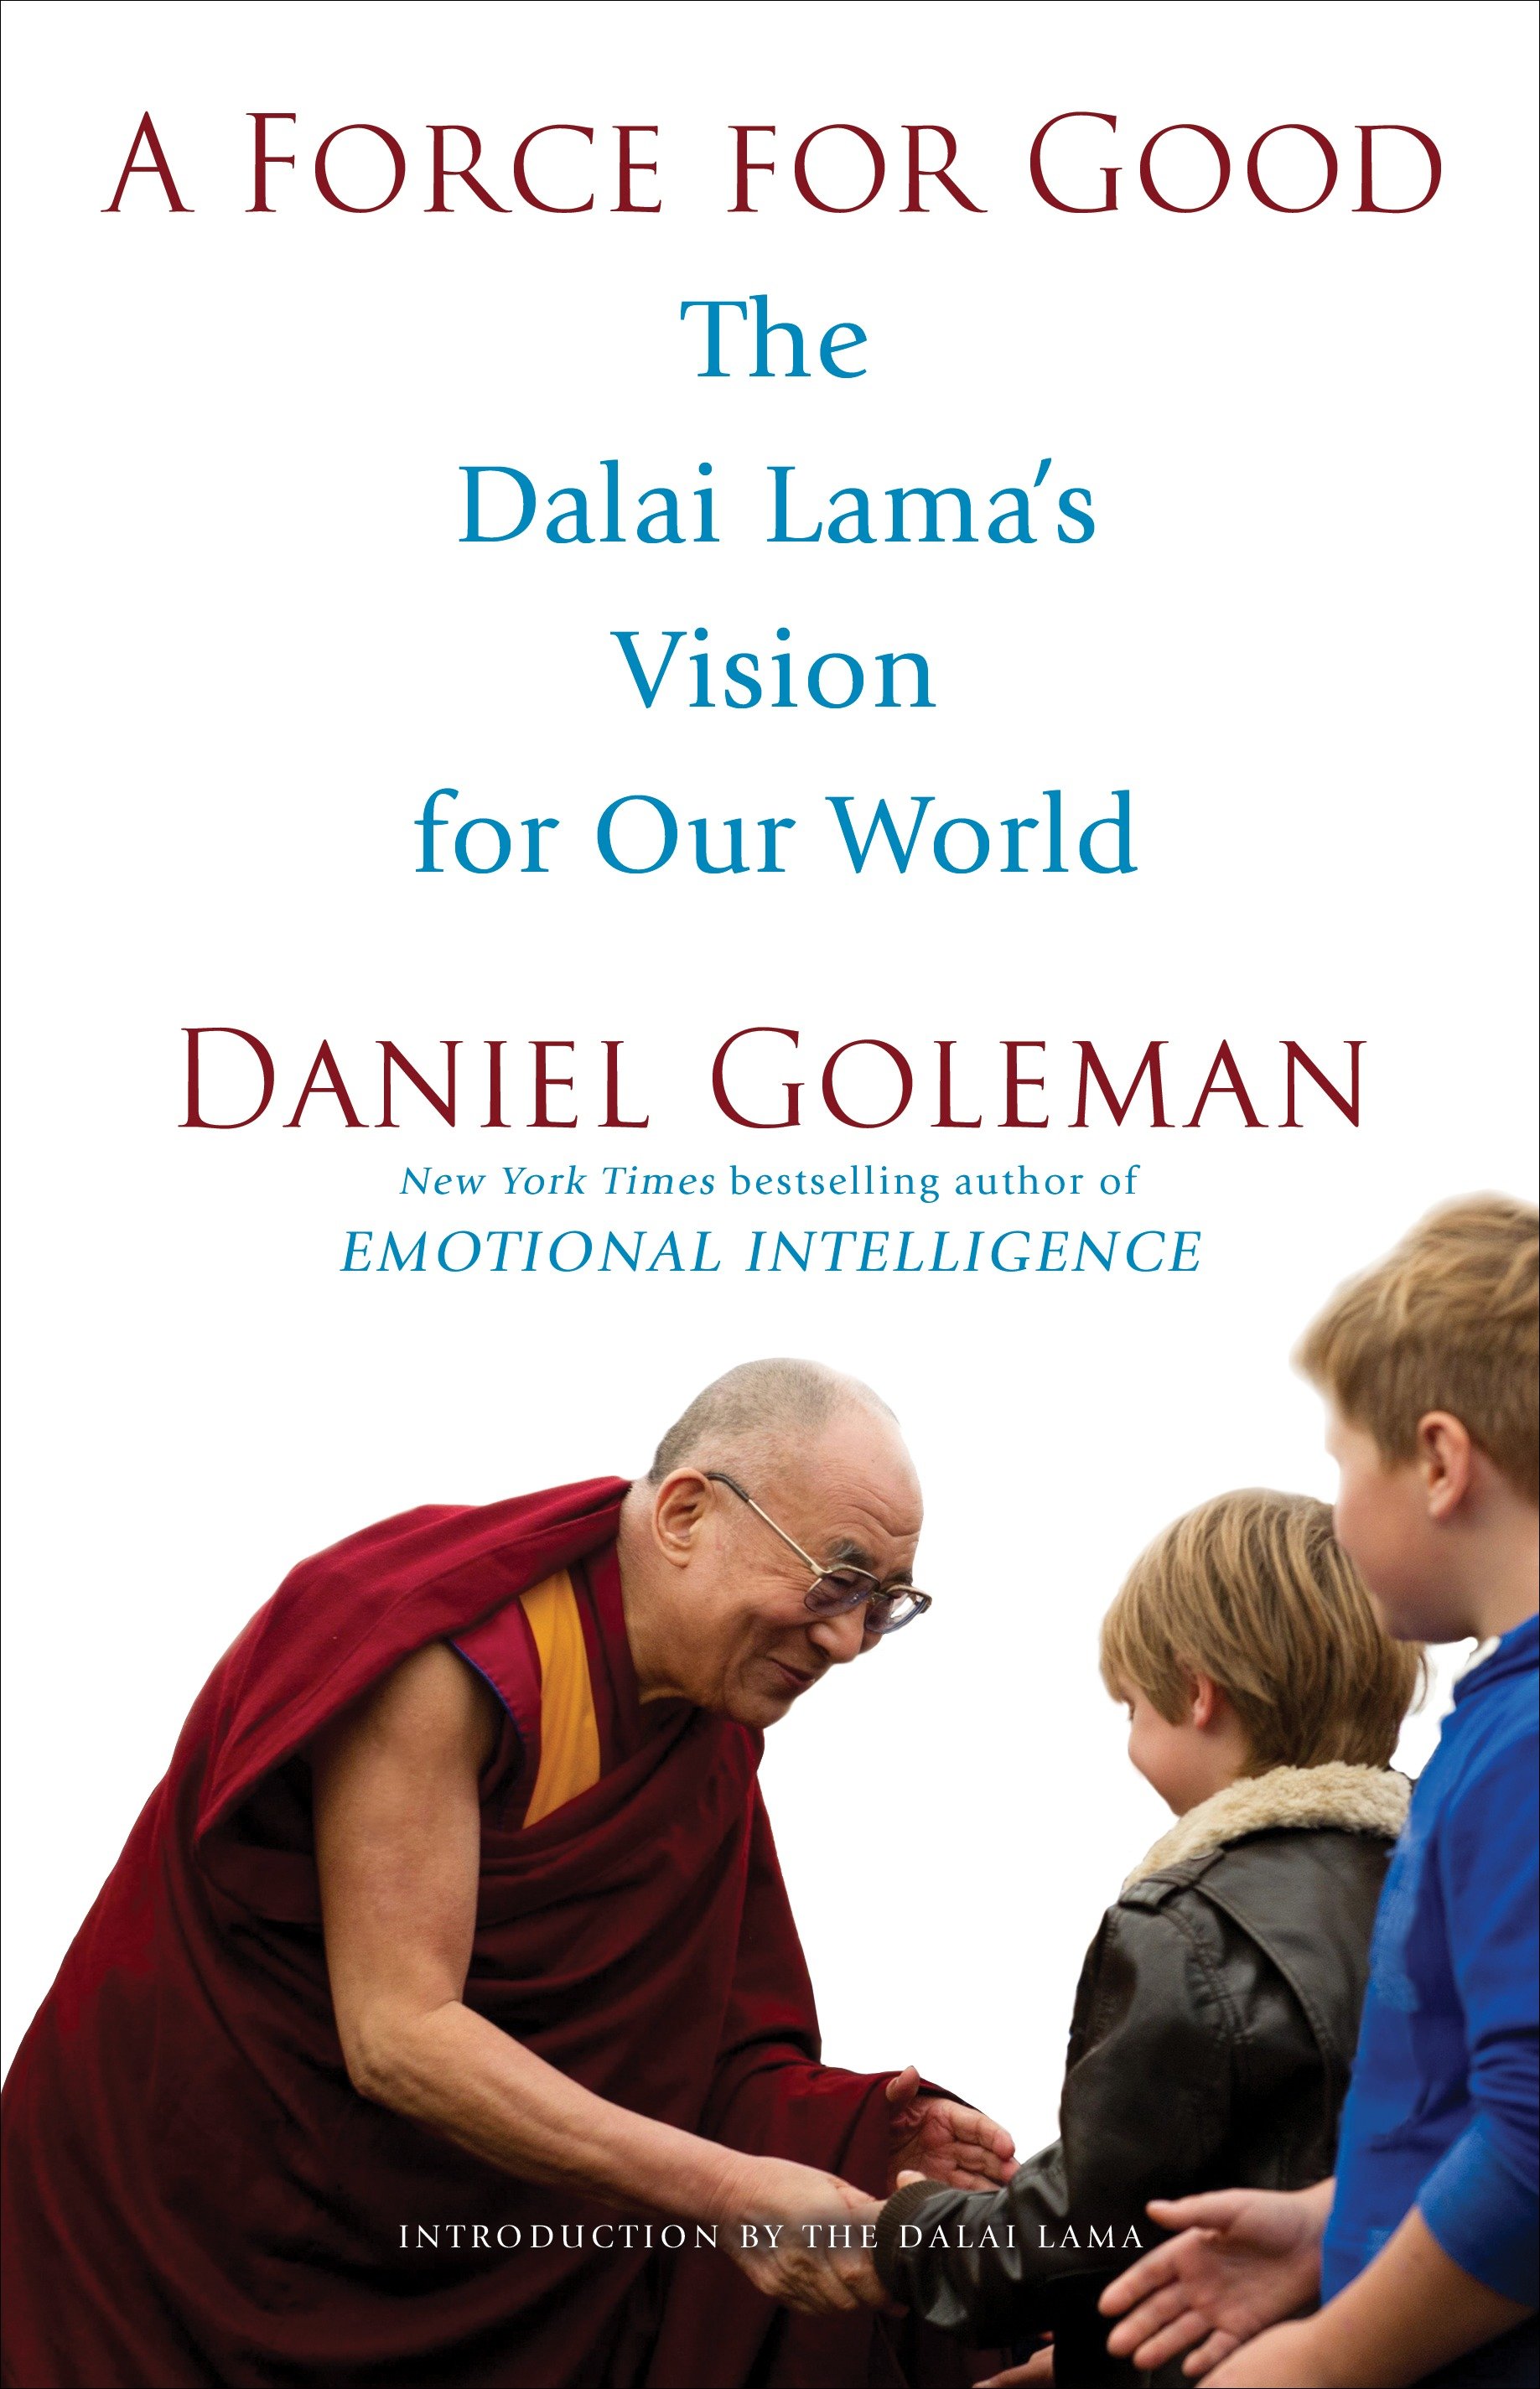 A force for good the Dalai Lama's vision for our world cover image